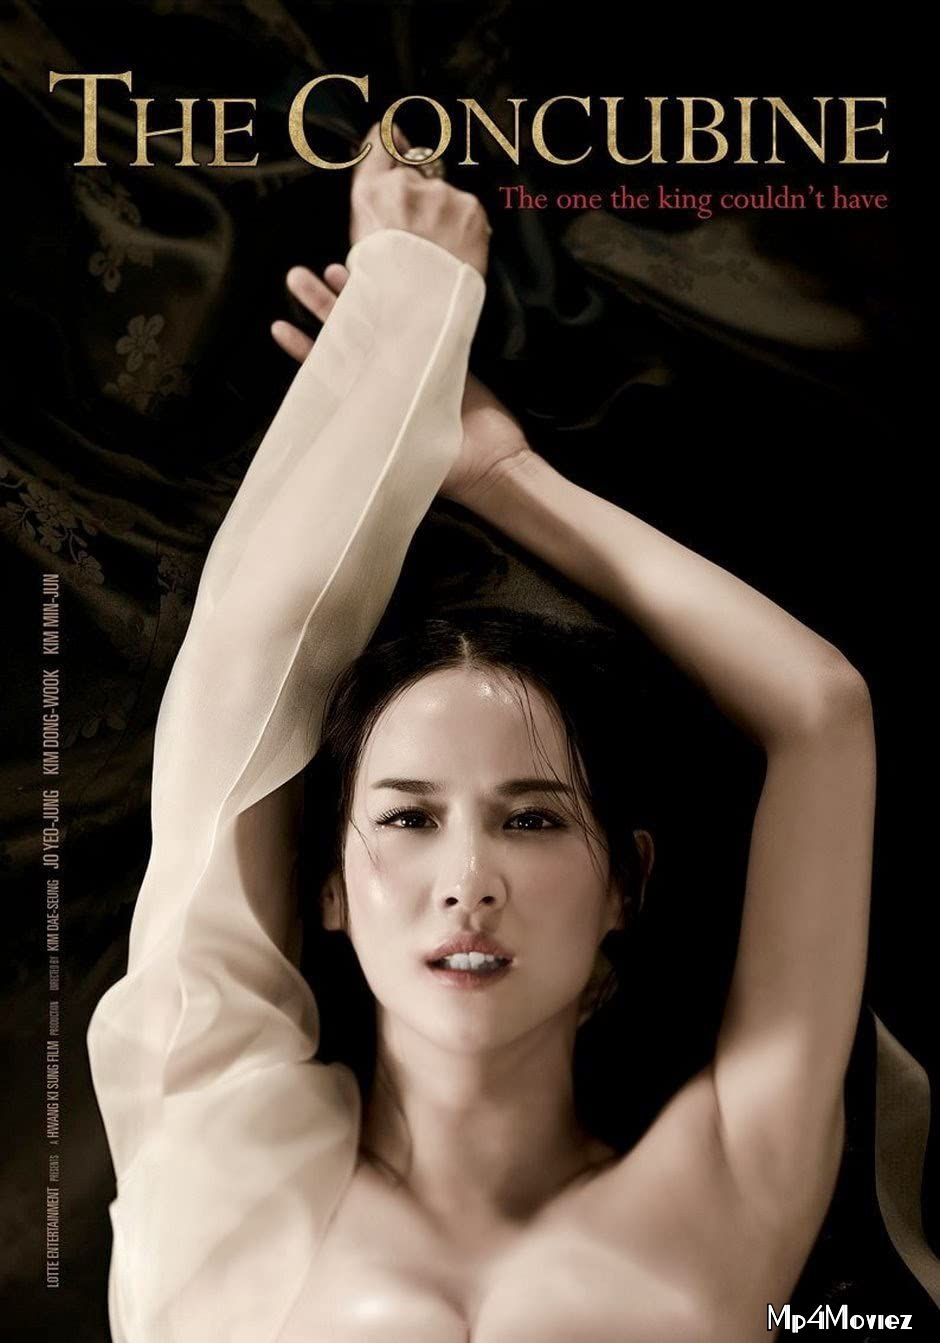 [18ᐩ] The Concubine (2012) Hindi Dubbed Full Movie download full movie